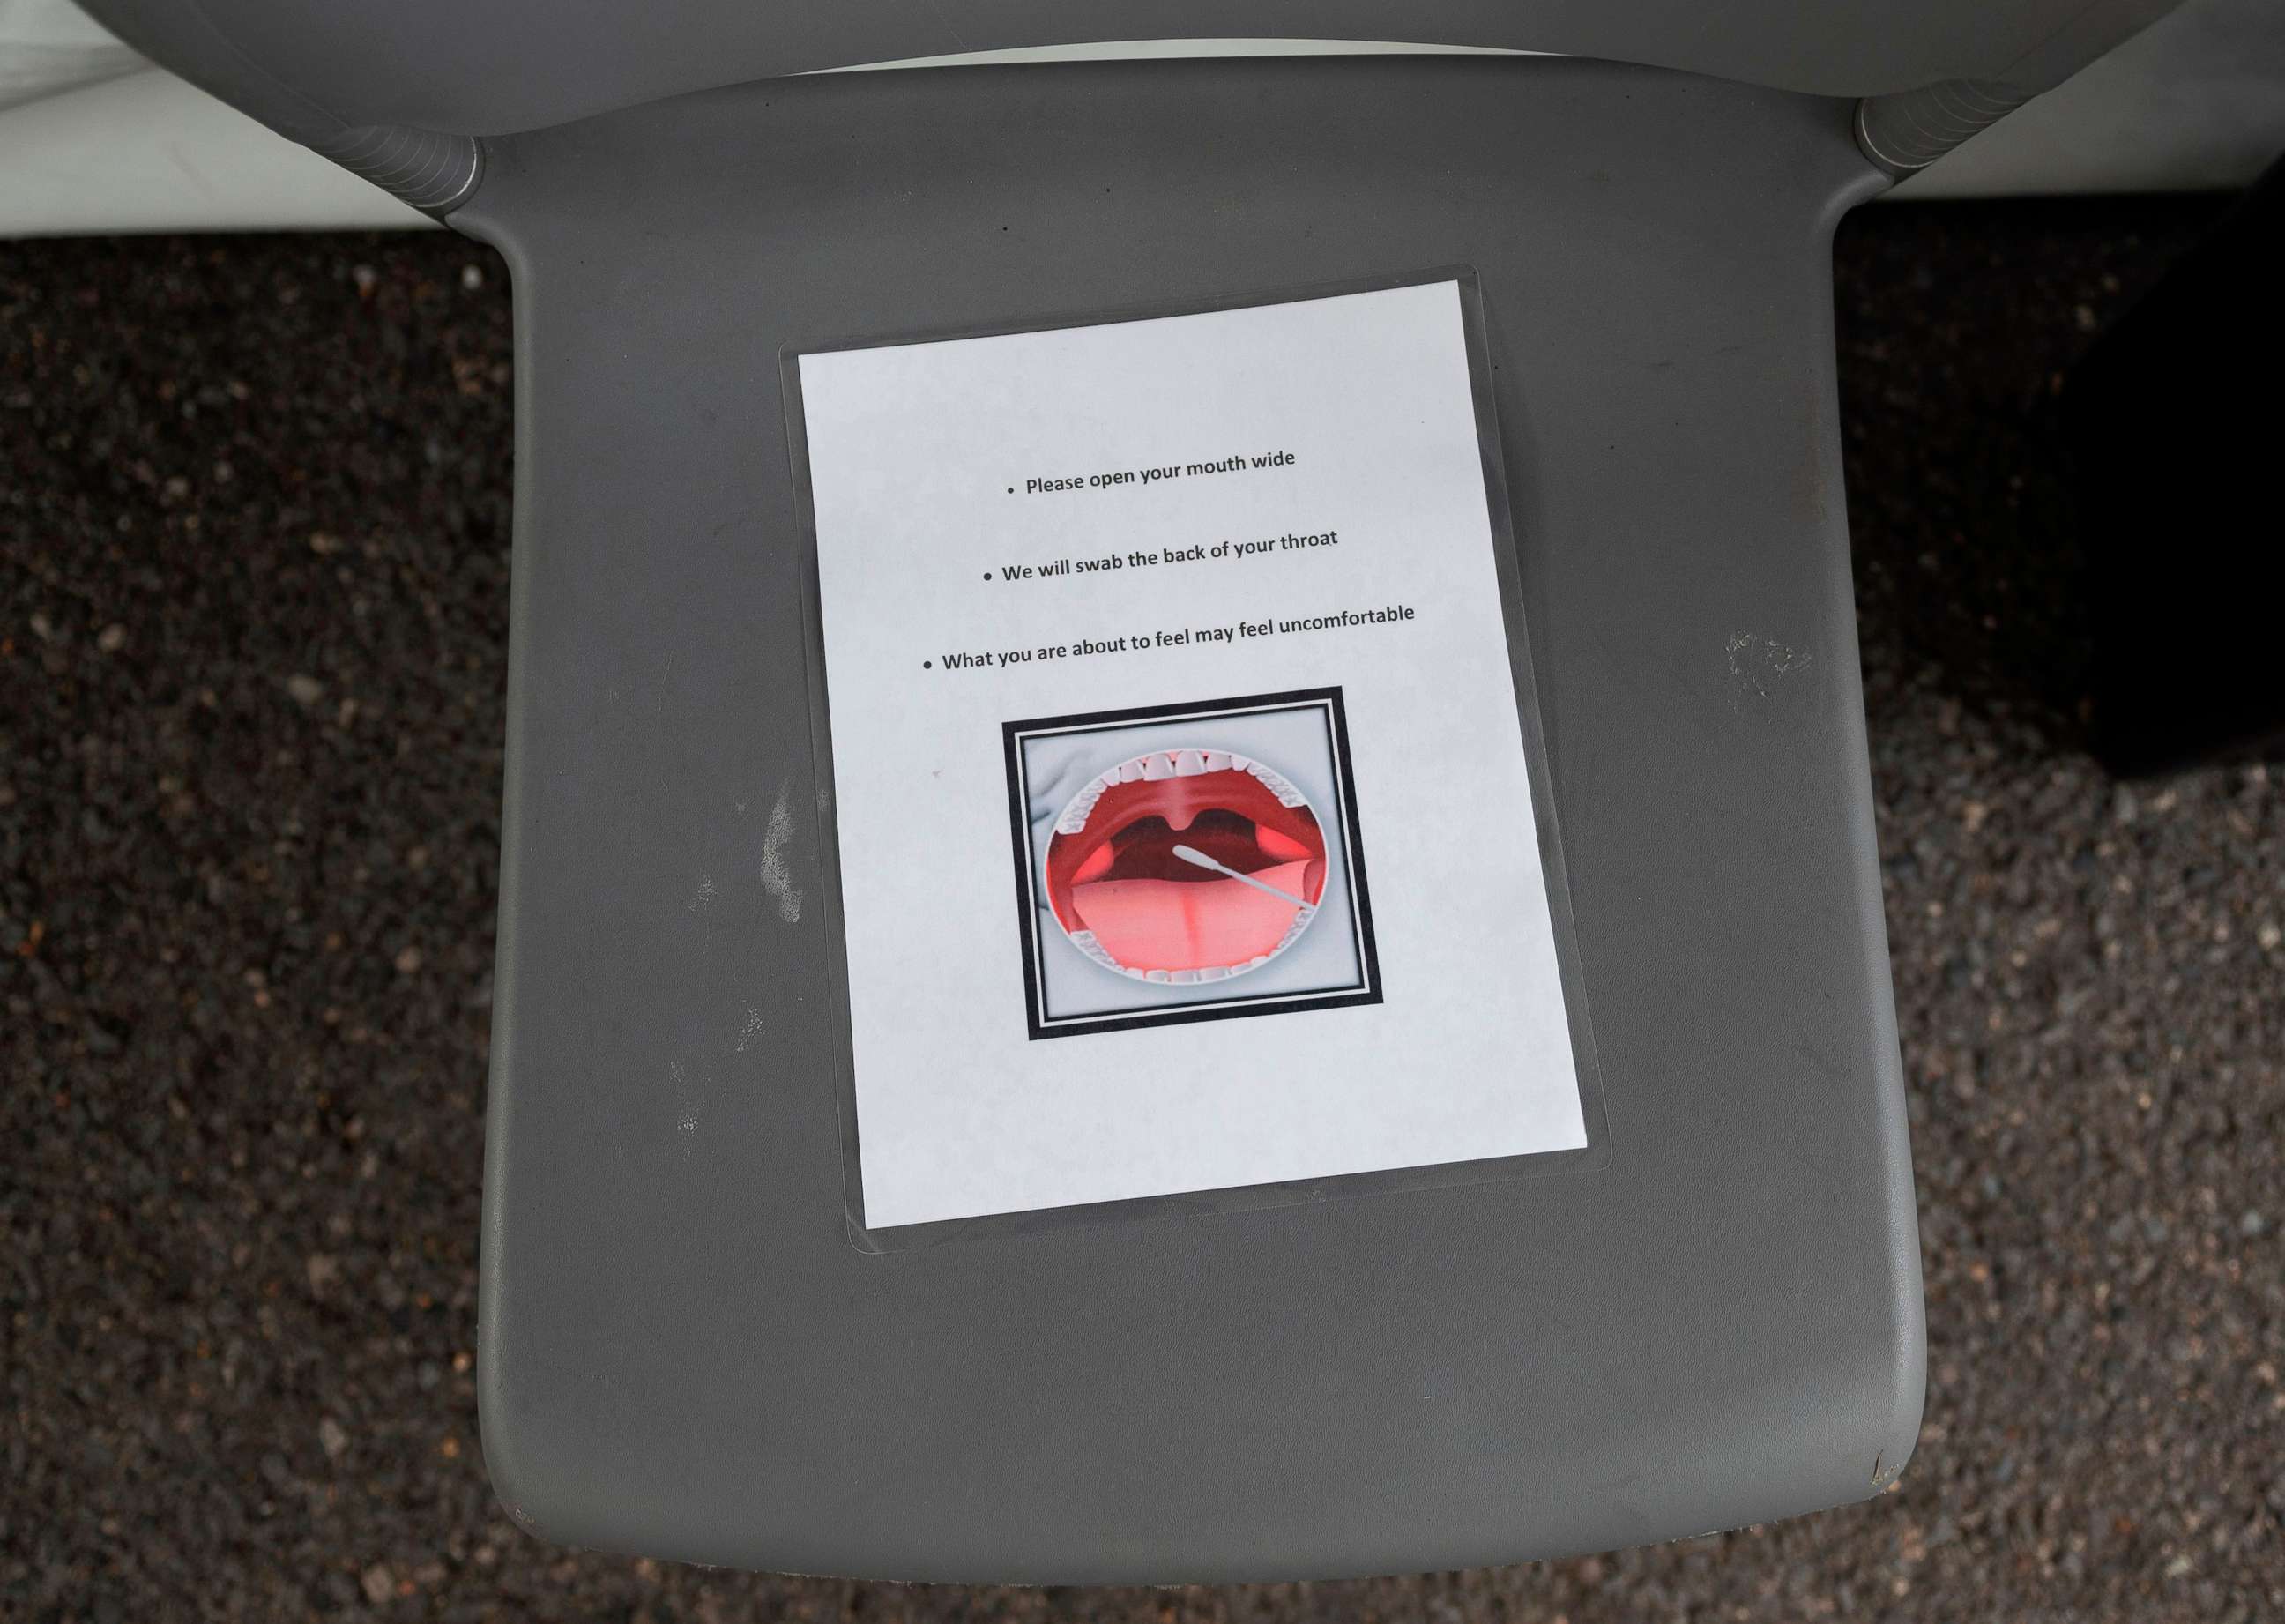 PHOTO: Instructions for being tested for coronavirus, COVID-19, are seen on a chair at a drive through testing site in Arlington, Va., on March 20, 2020.